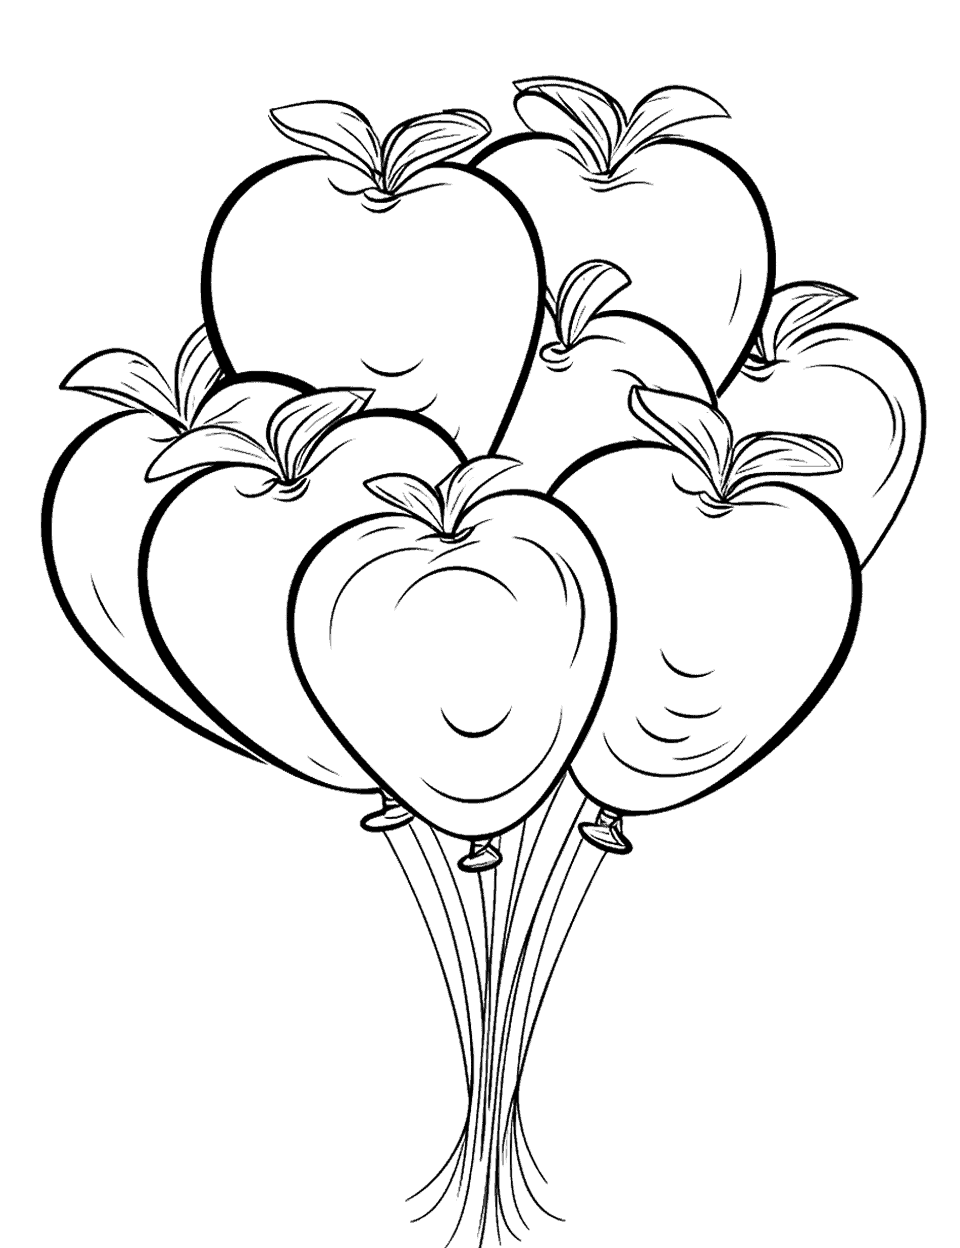 Apple-Shaped Balloons Apple Coloring Page - Balloons in the shape of apples floating in the sky.